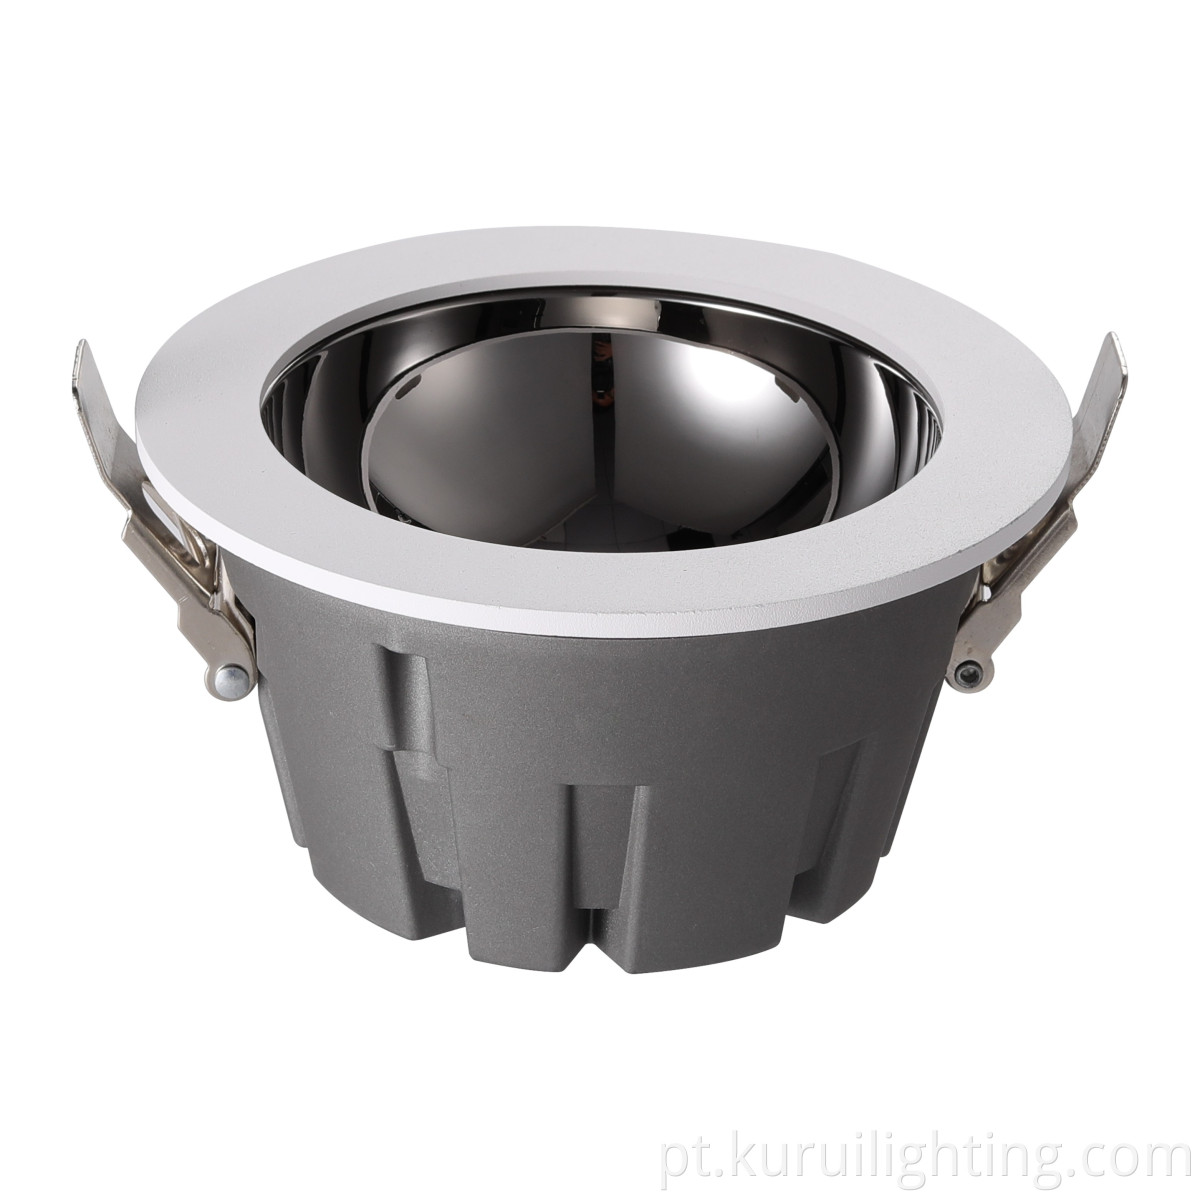 Led Recessed Downlights